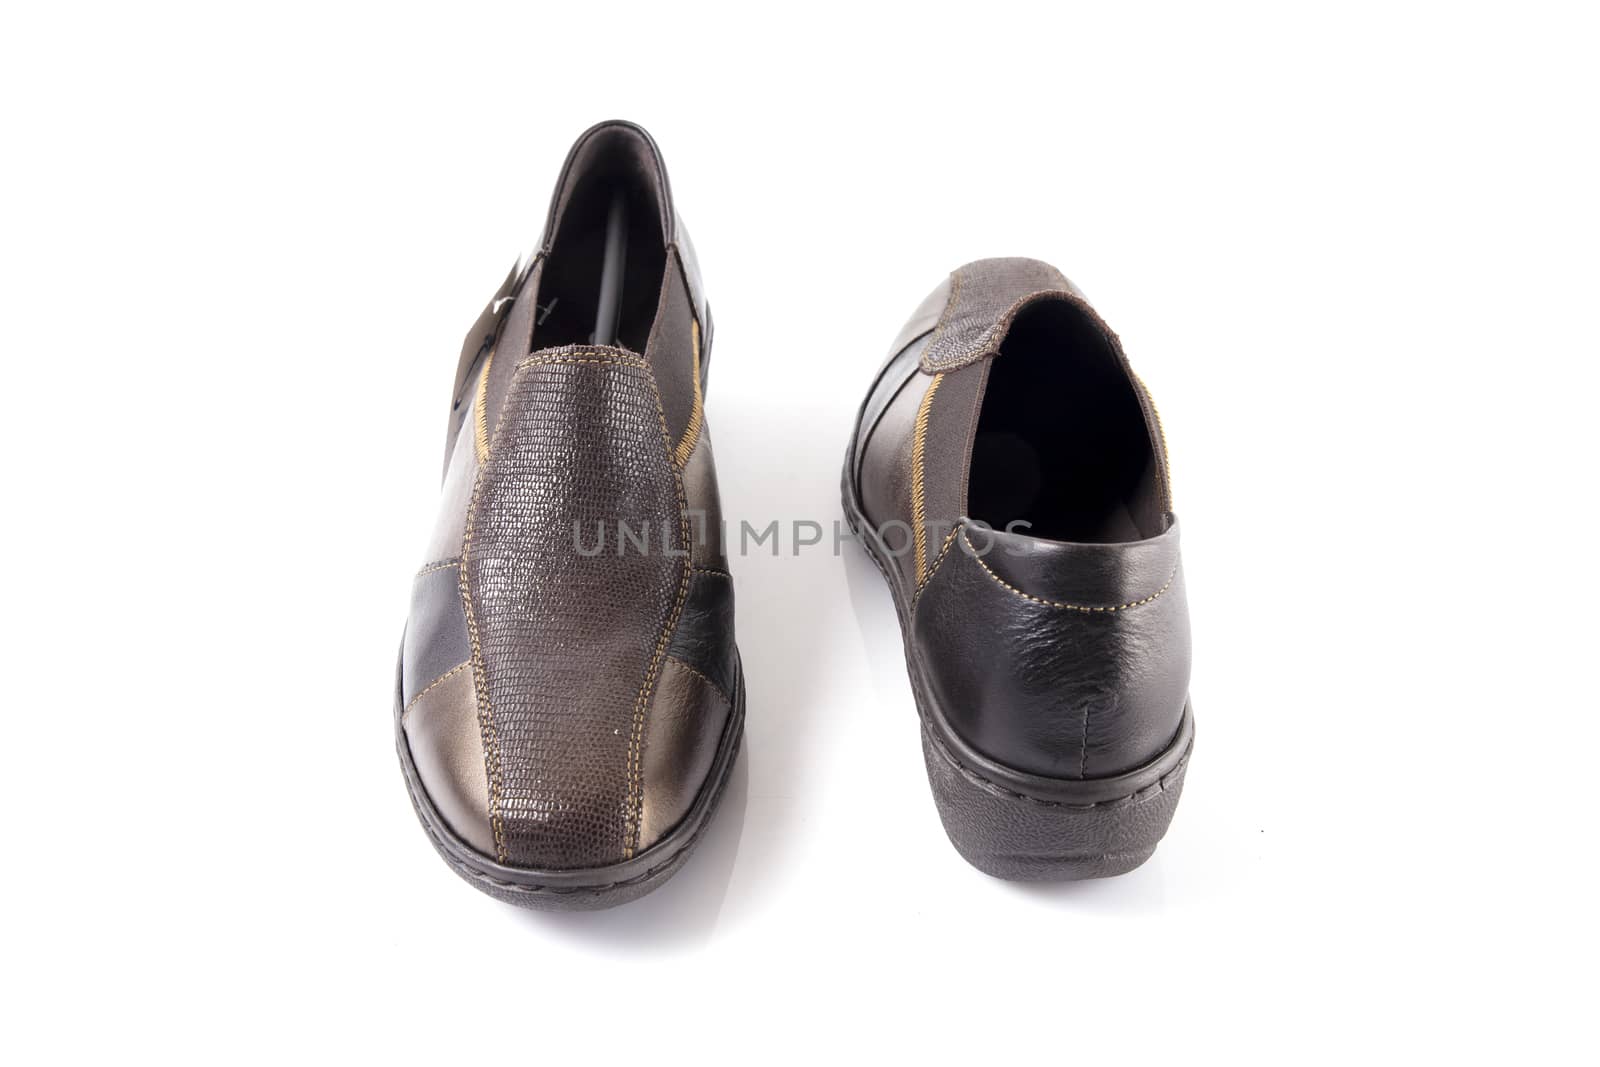 Pair of brown leather shoes on white background, isolated product, top view. by GeorgeVieiraSilva